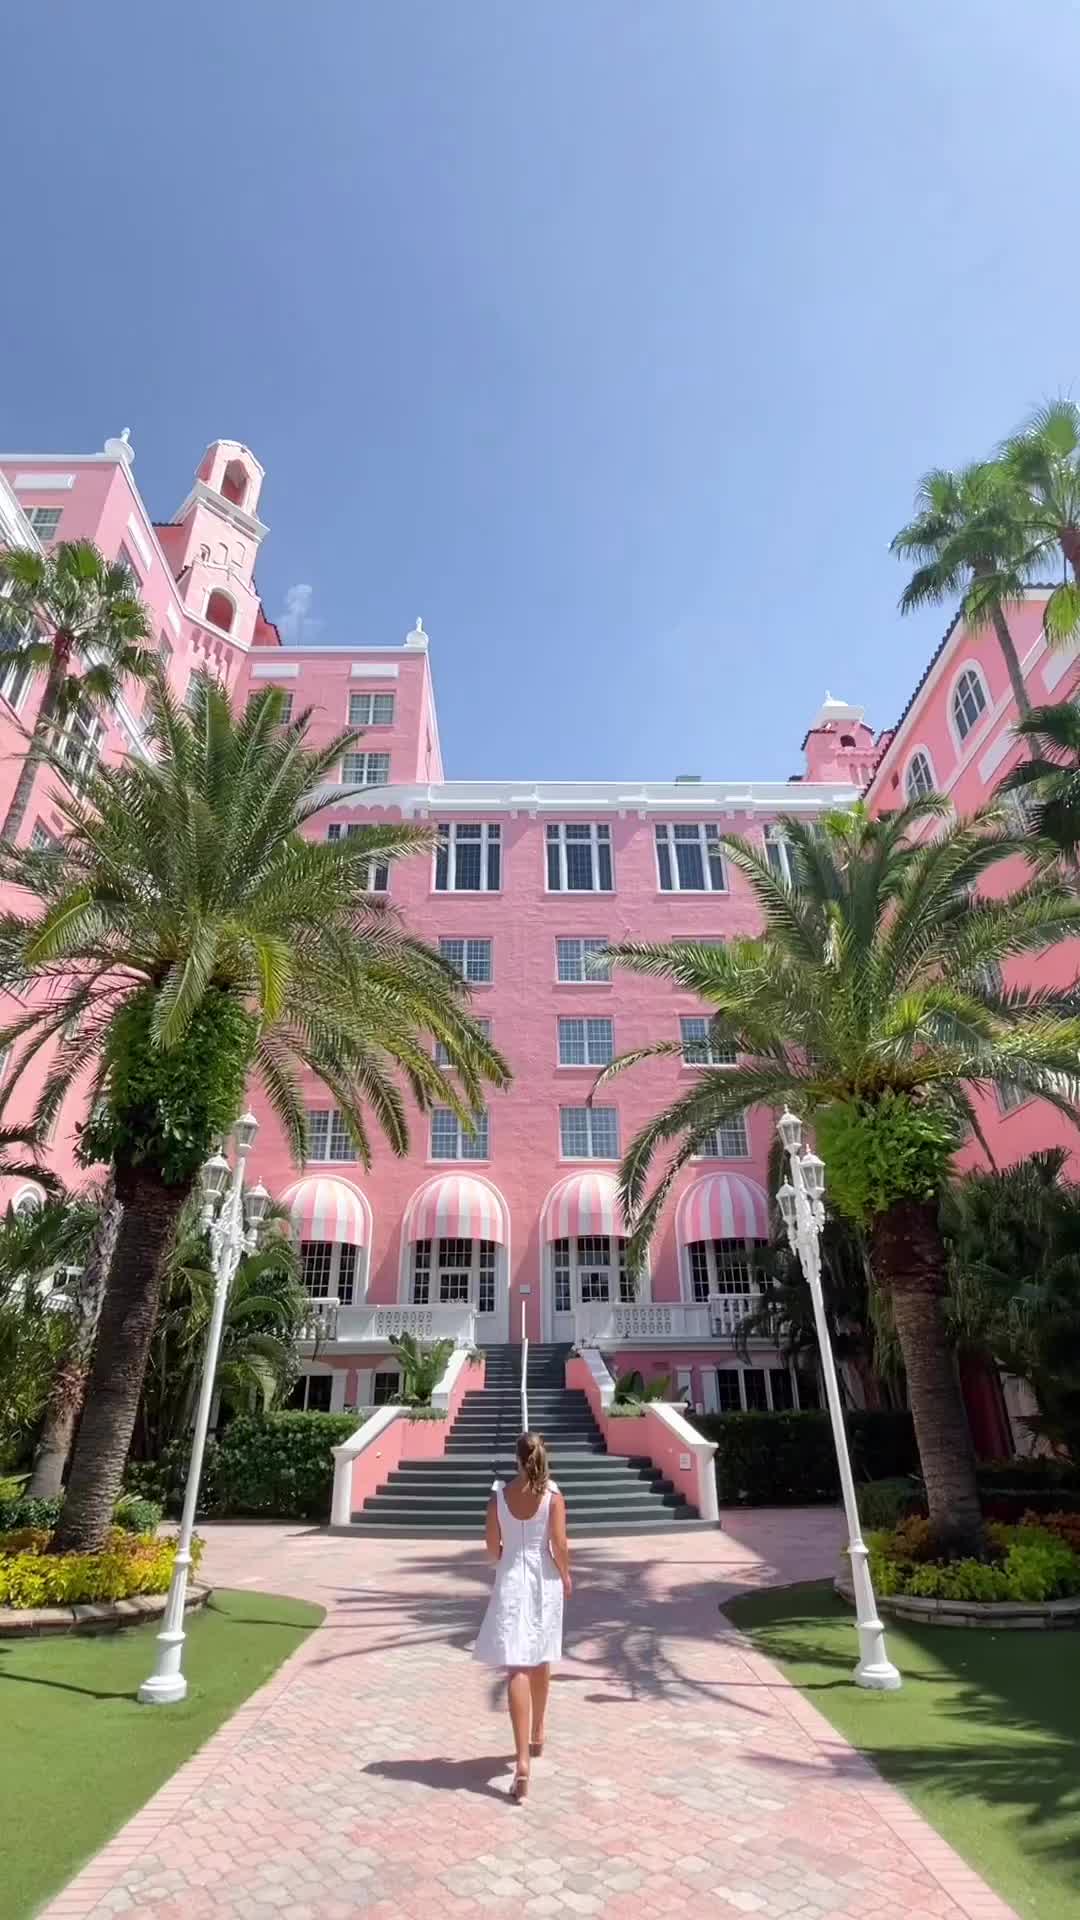 Brighter Days at The Don CeSar Resort | St. Pete Beach